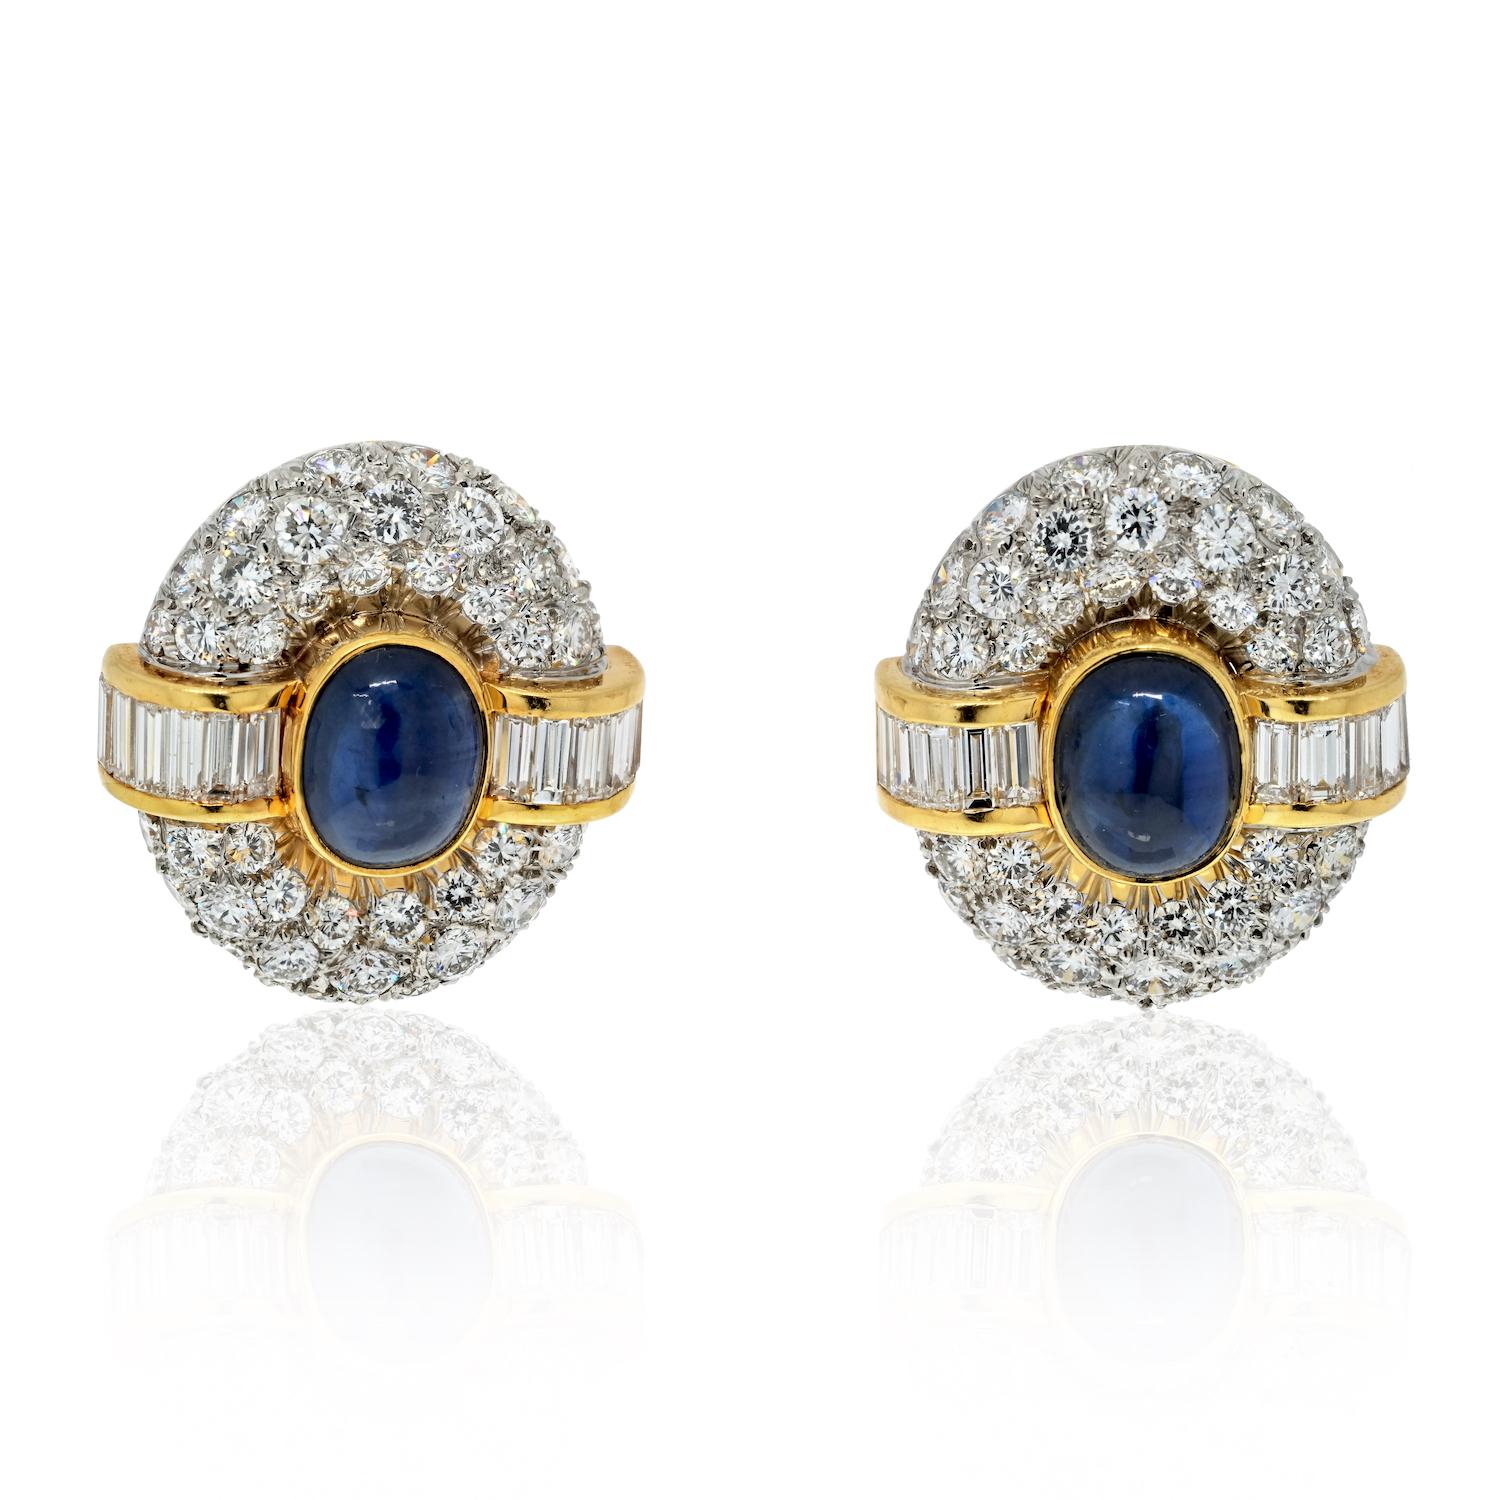 The Van Cleef & Arpels 18K Yellow Gold Sapphire And Diamond Clip On Earrings are a stunning display of elegance and craftsmanship. These earrings feature a striking design that centers around a mesmerizing oval cabochon-cut sapphire, measuring 9mm